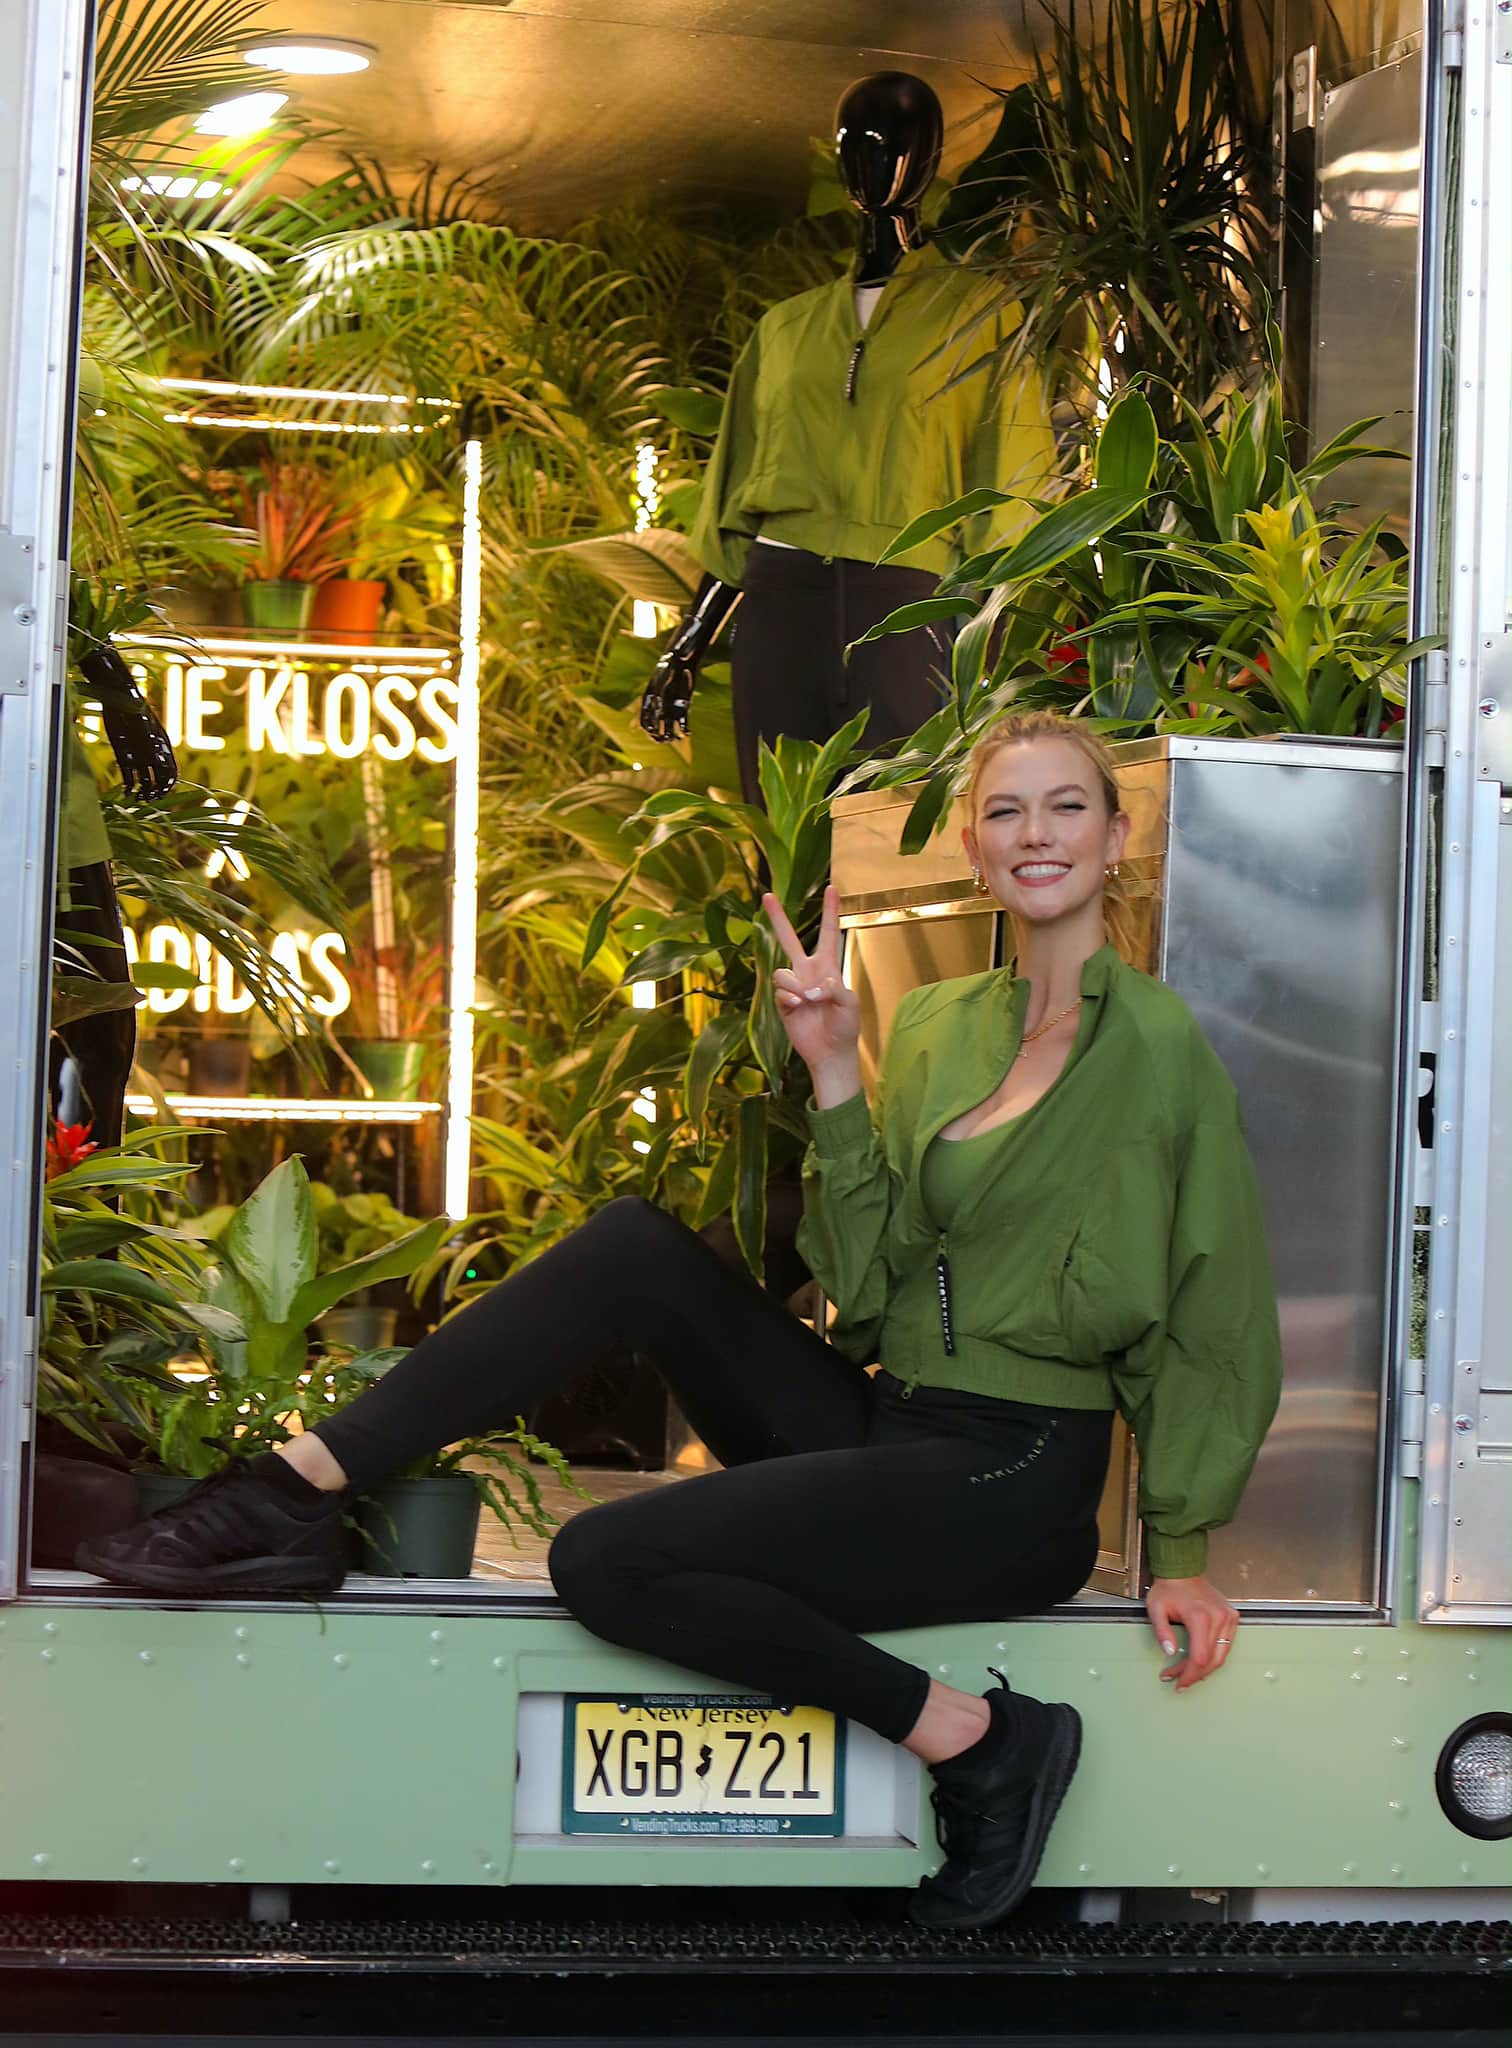 Karlie Kloss models pieces from her nature-themed Adidas line